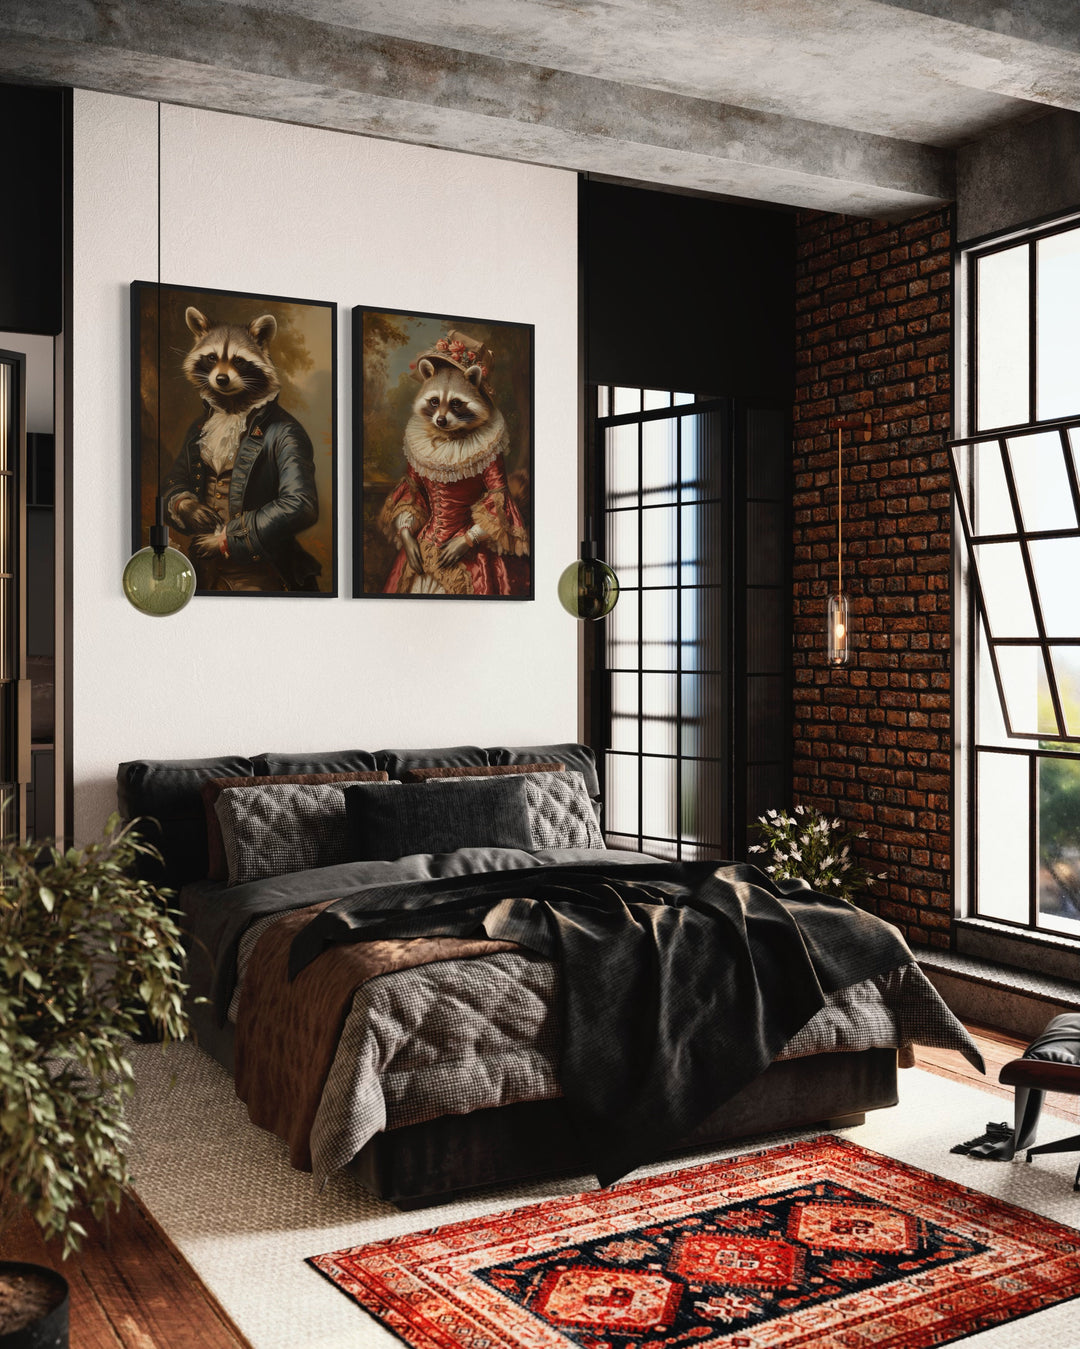 Raccoons Couple Vintage Victorian Portrait Framed Canvas Wall Art above black bed